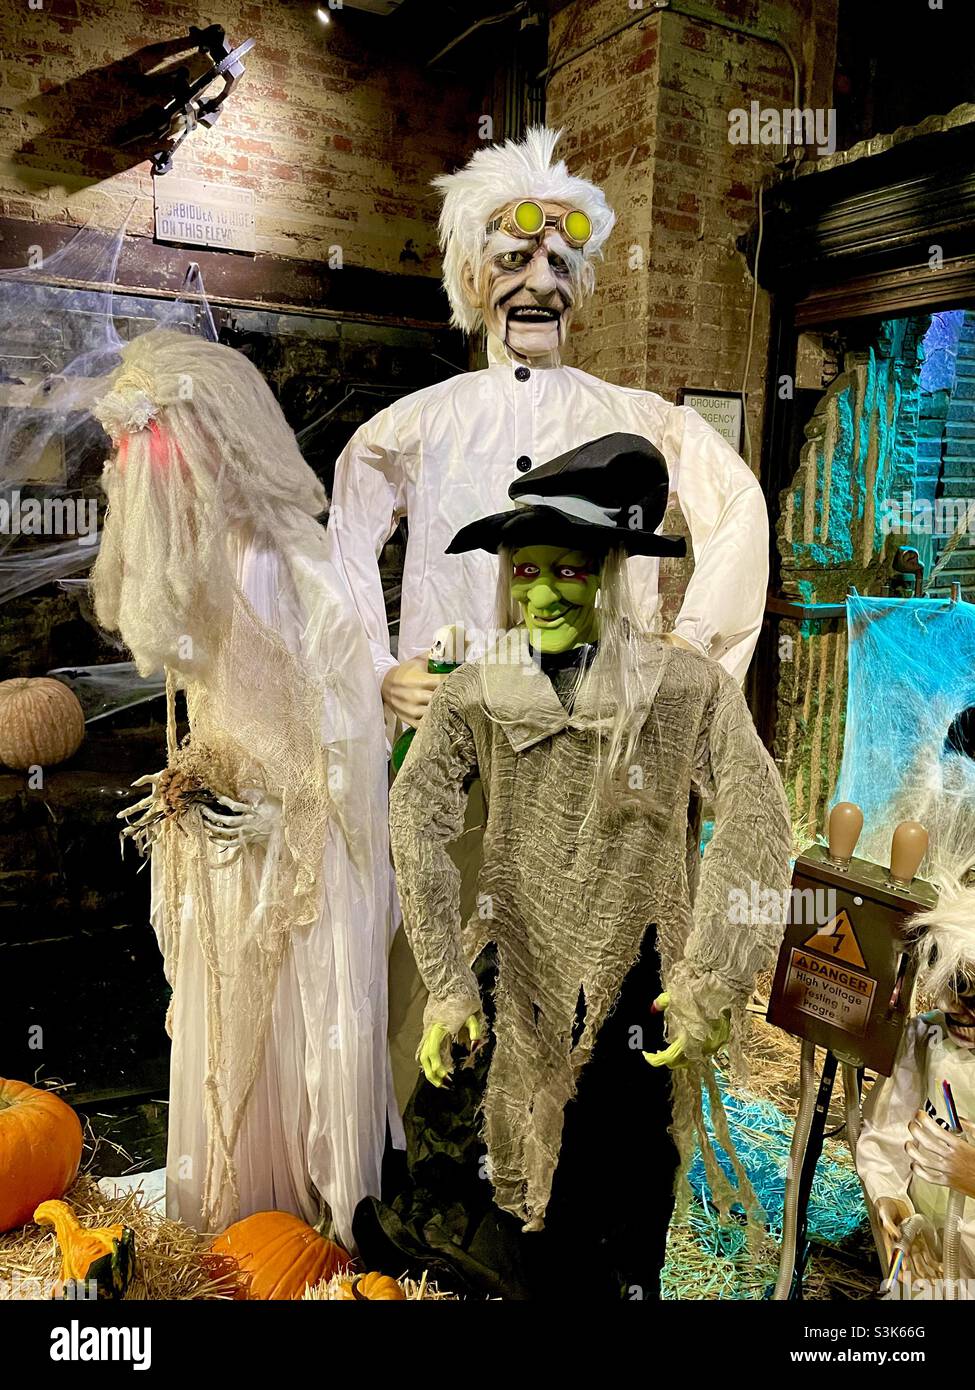 Ghouls and goblins on Halloween in. Chelsea market, New York City Stock Photo